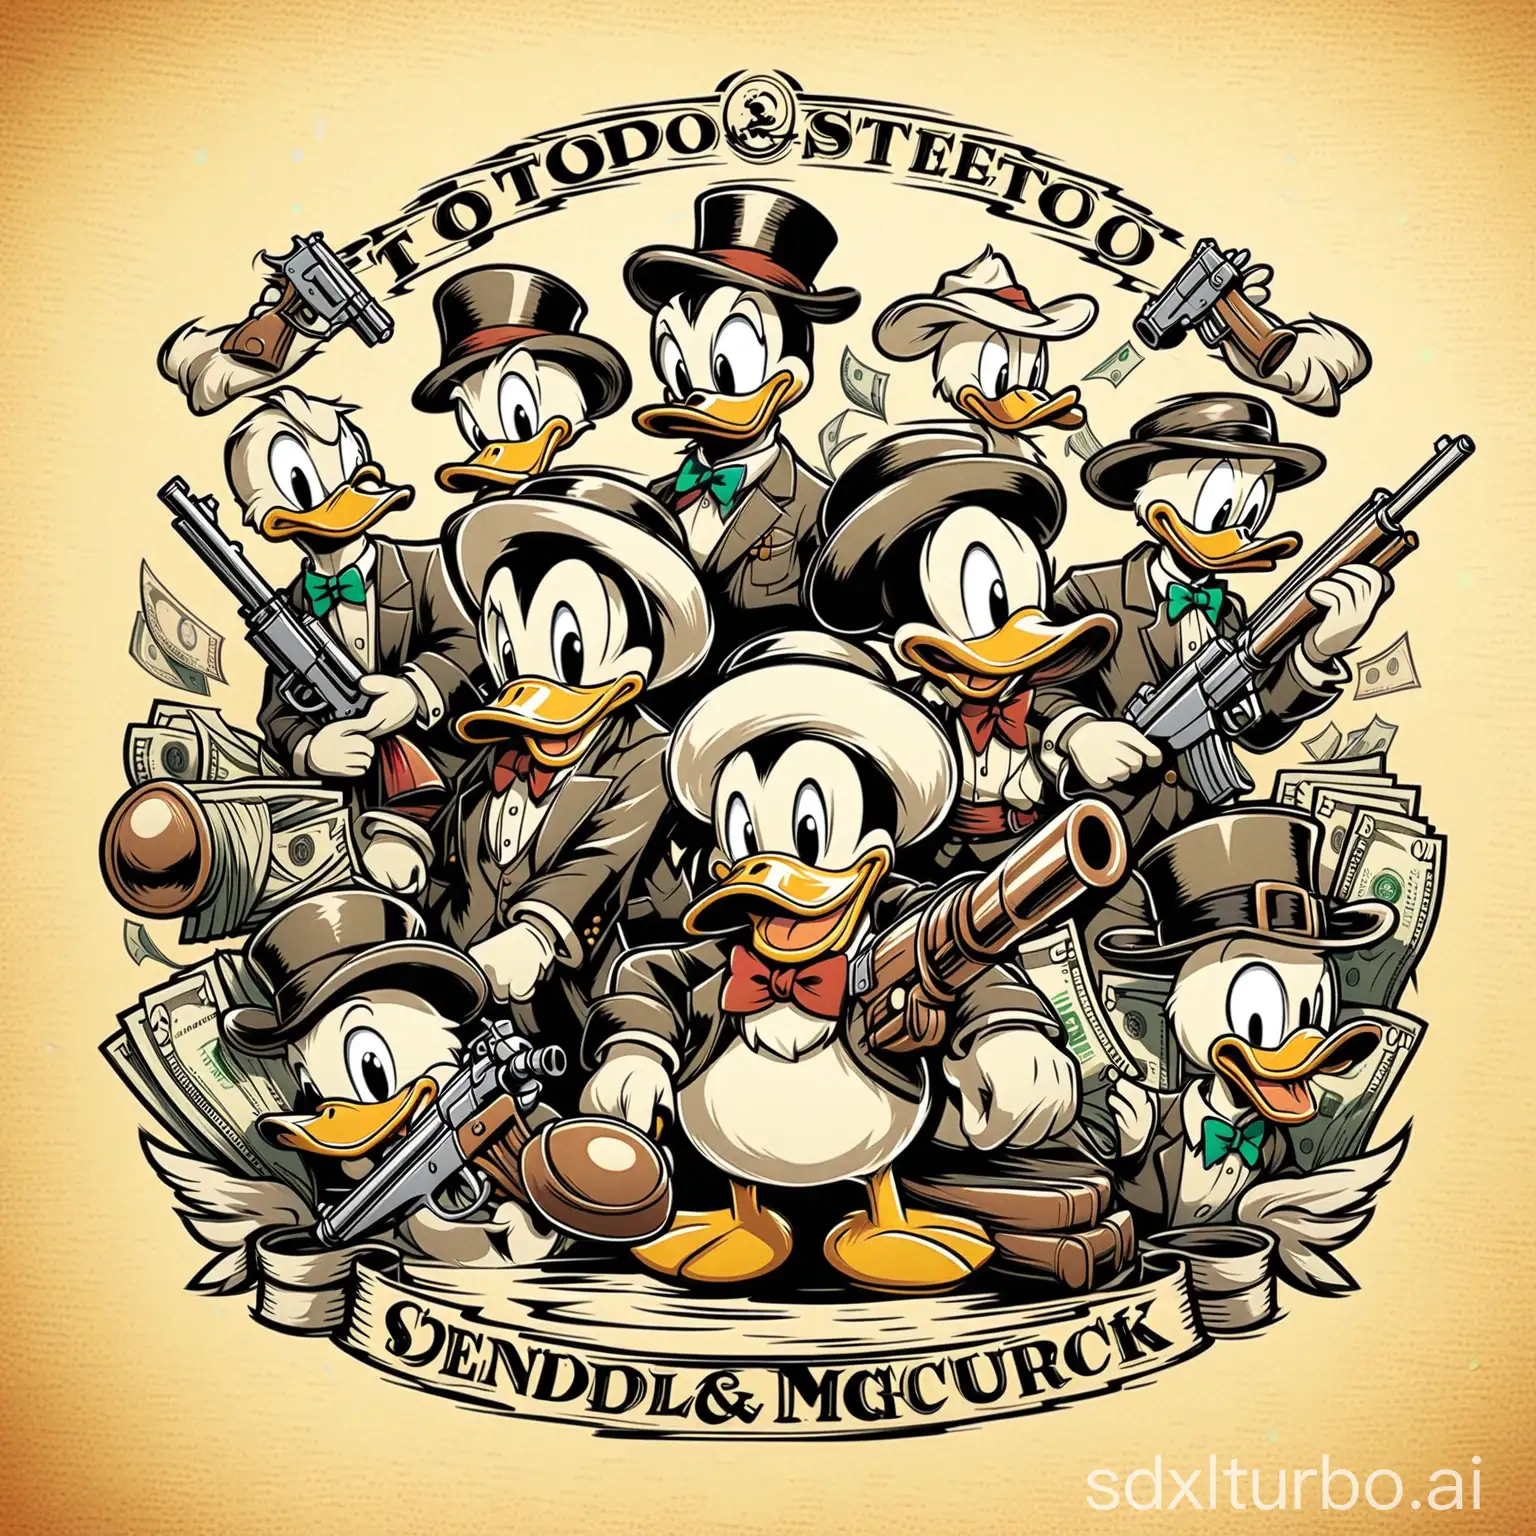 Gangster-Donald-Duck-and-Friends-with-Money-and-Guns-Tattoo-Sketch